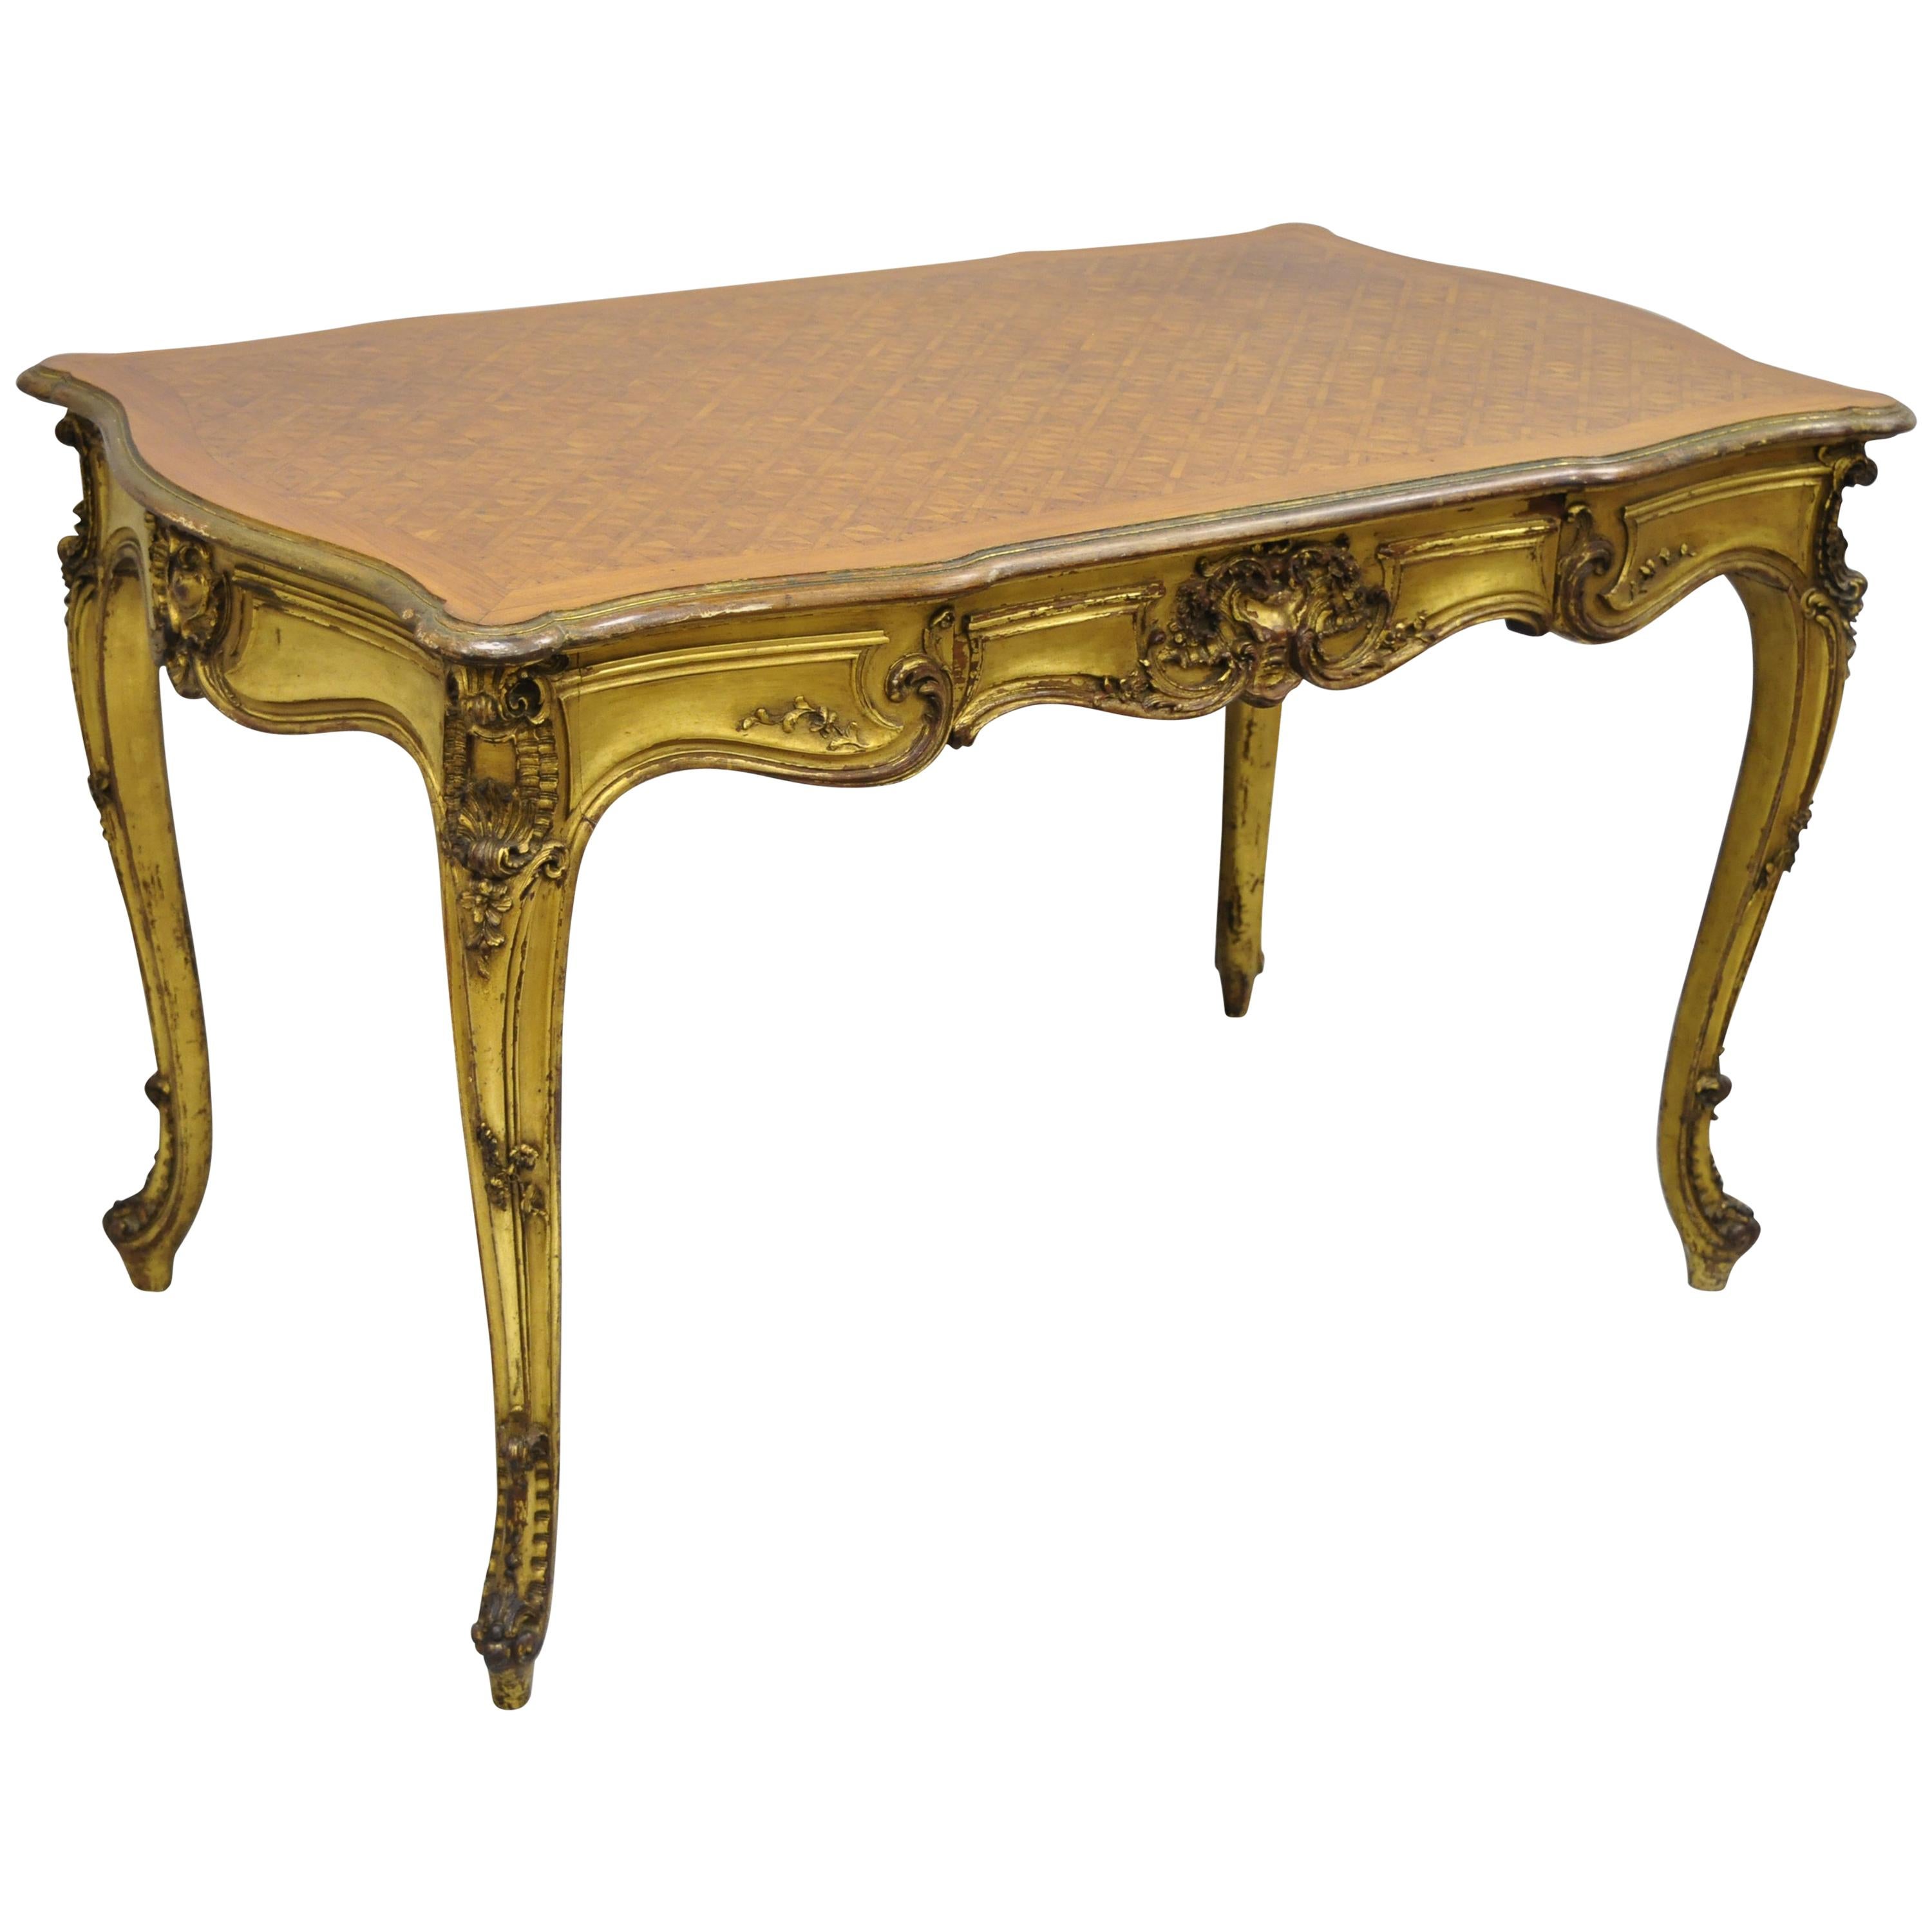 French Louis XV Style Gold Gilt Writing Desk with Marquetry Inlaid Top